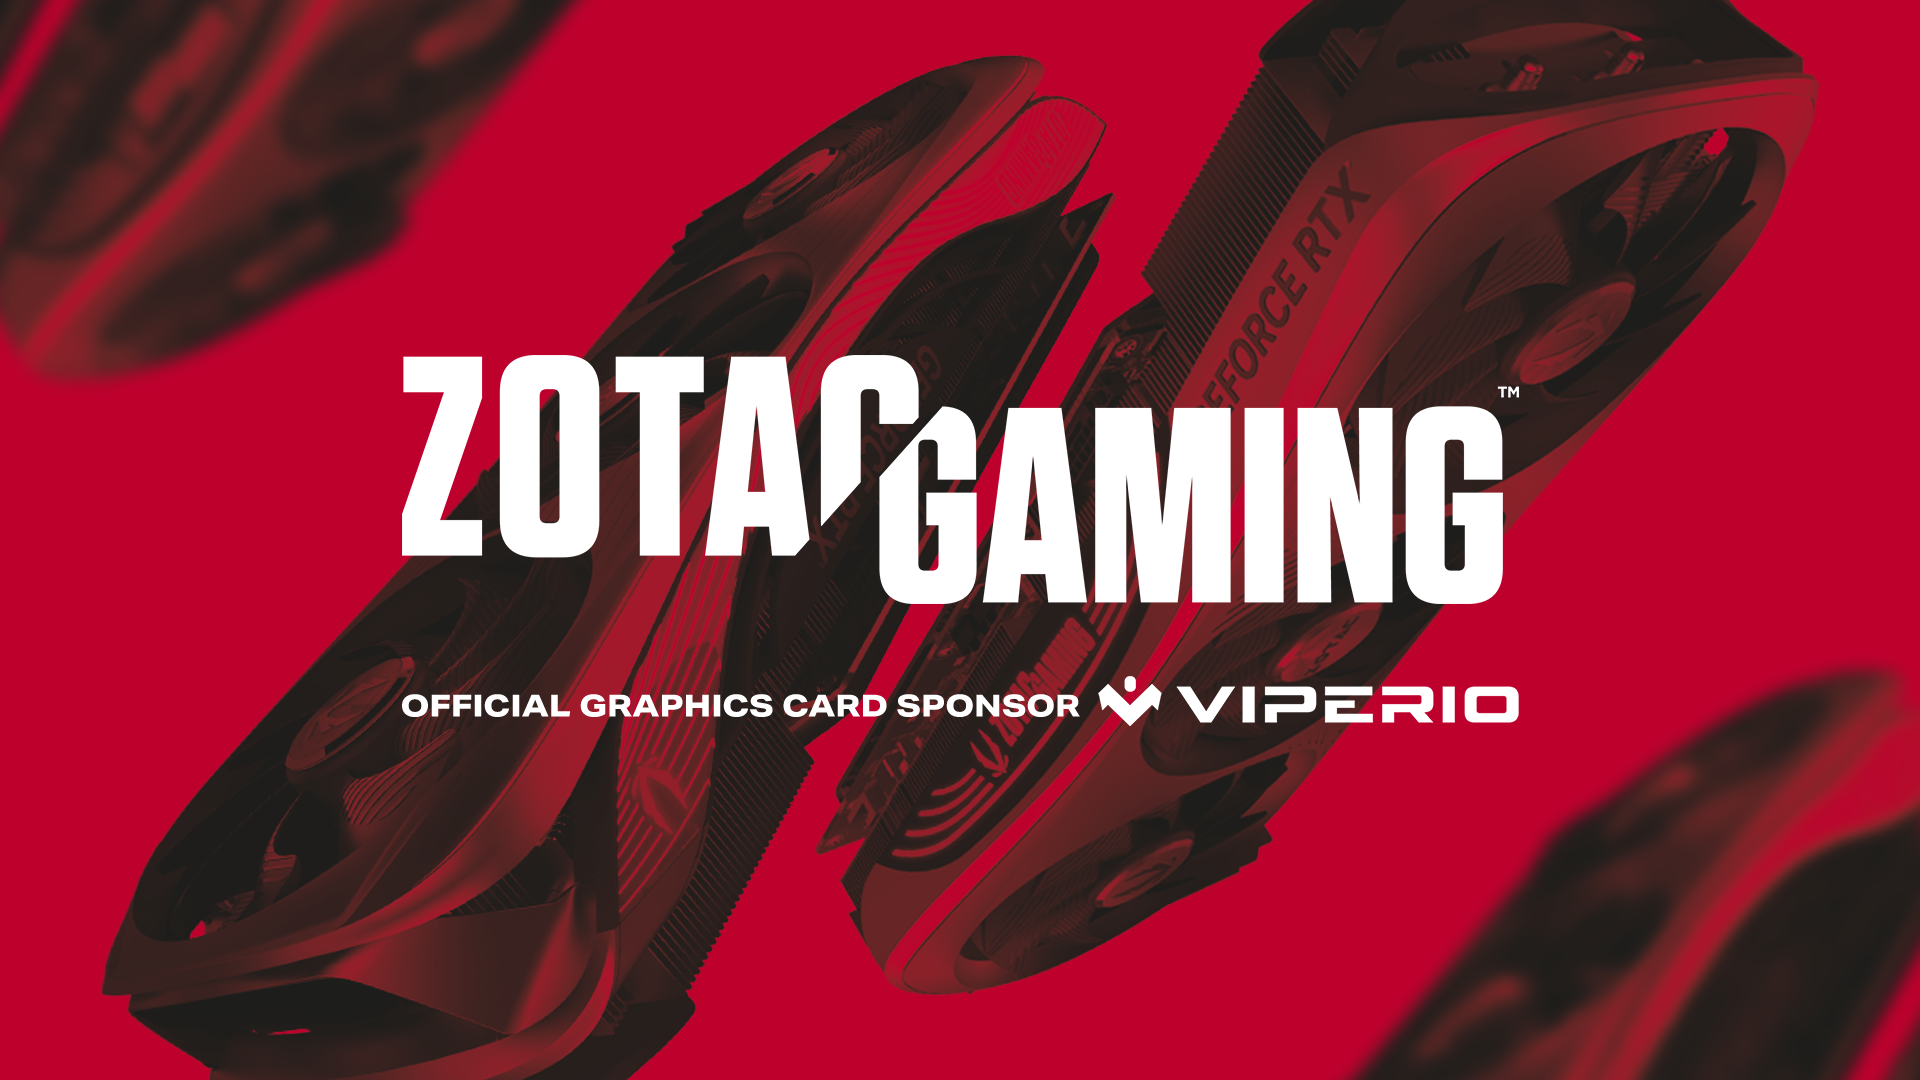 Viperio welcomes ZOTAC as Official Graphic Card Sponsor